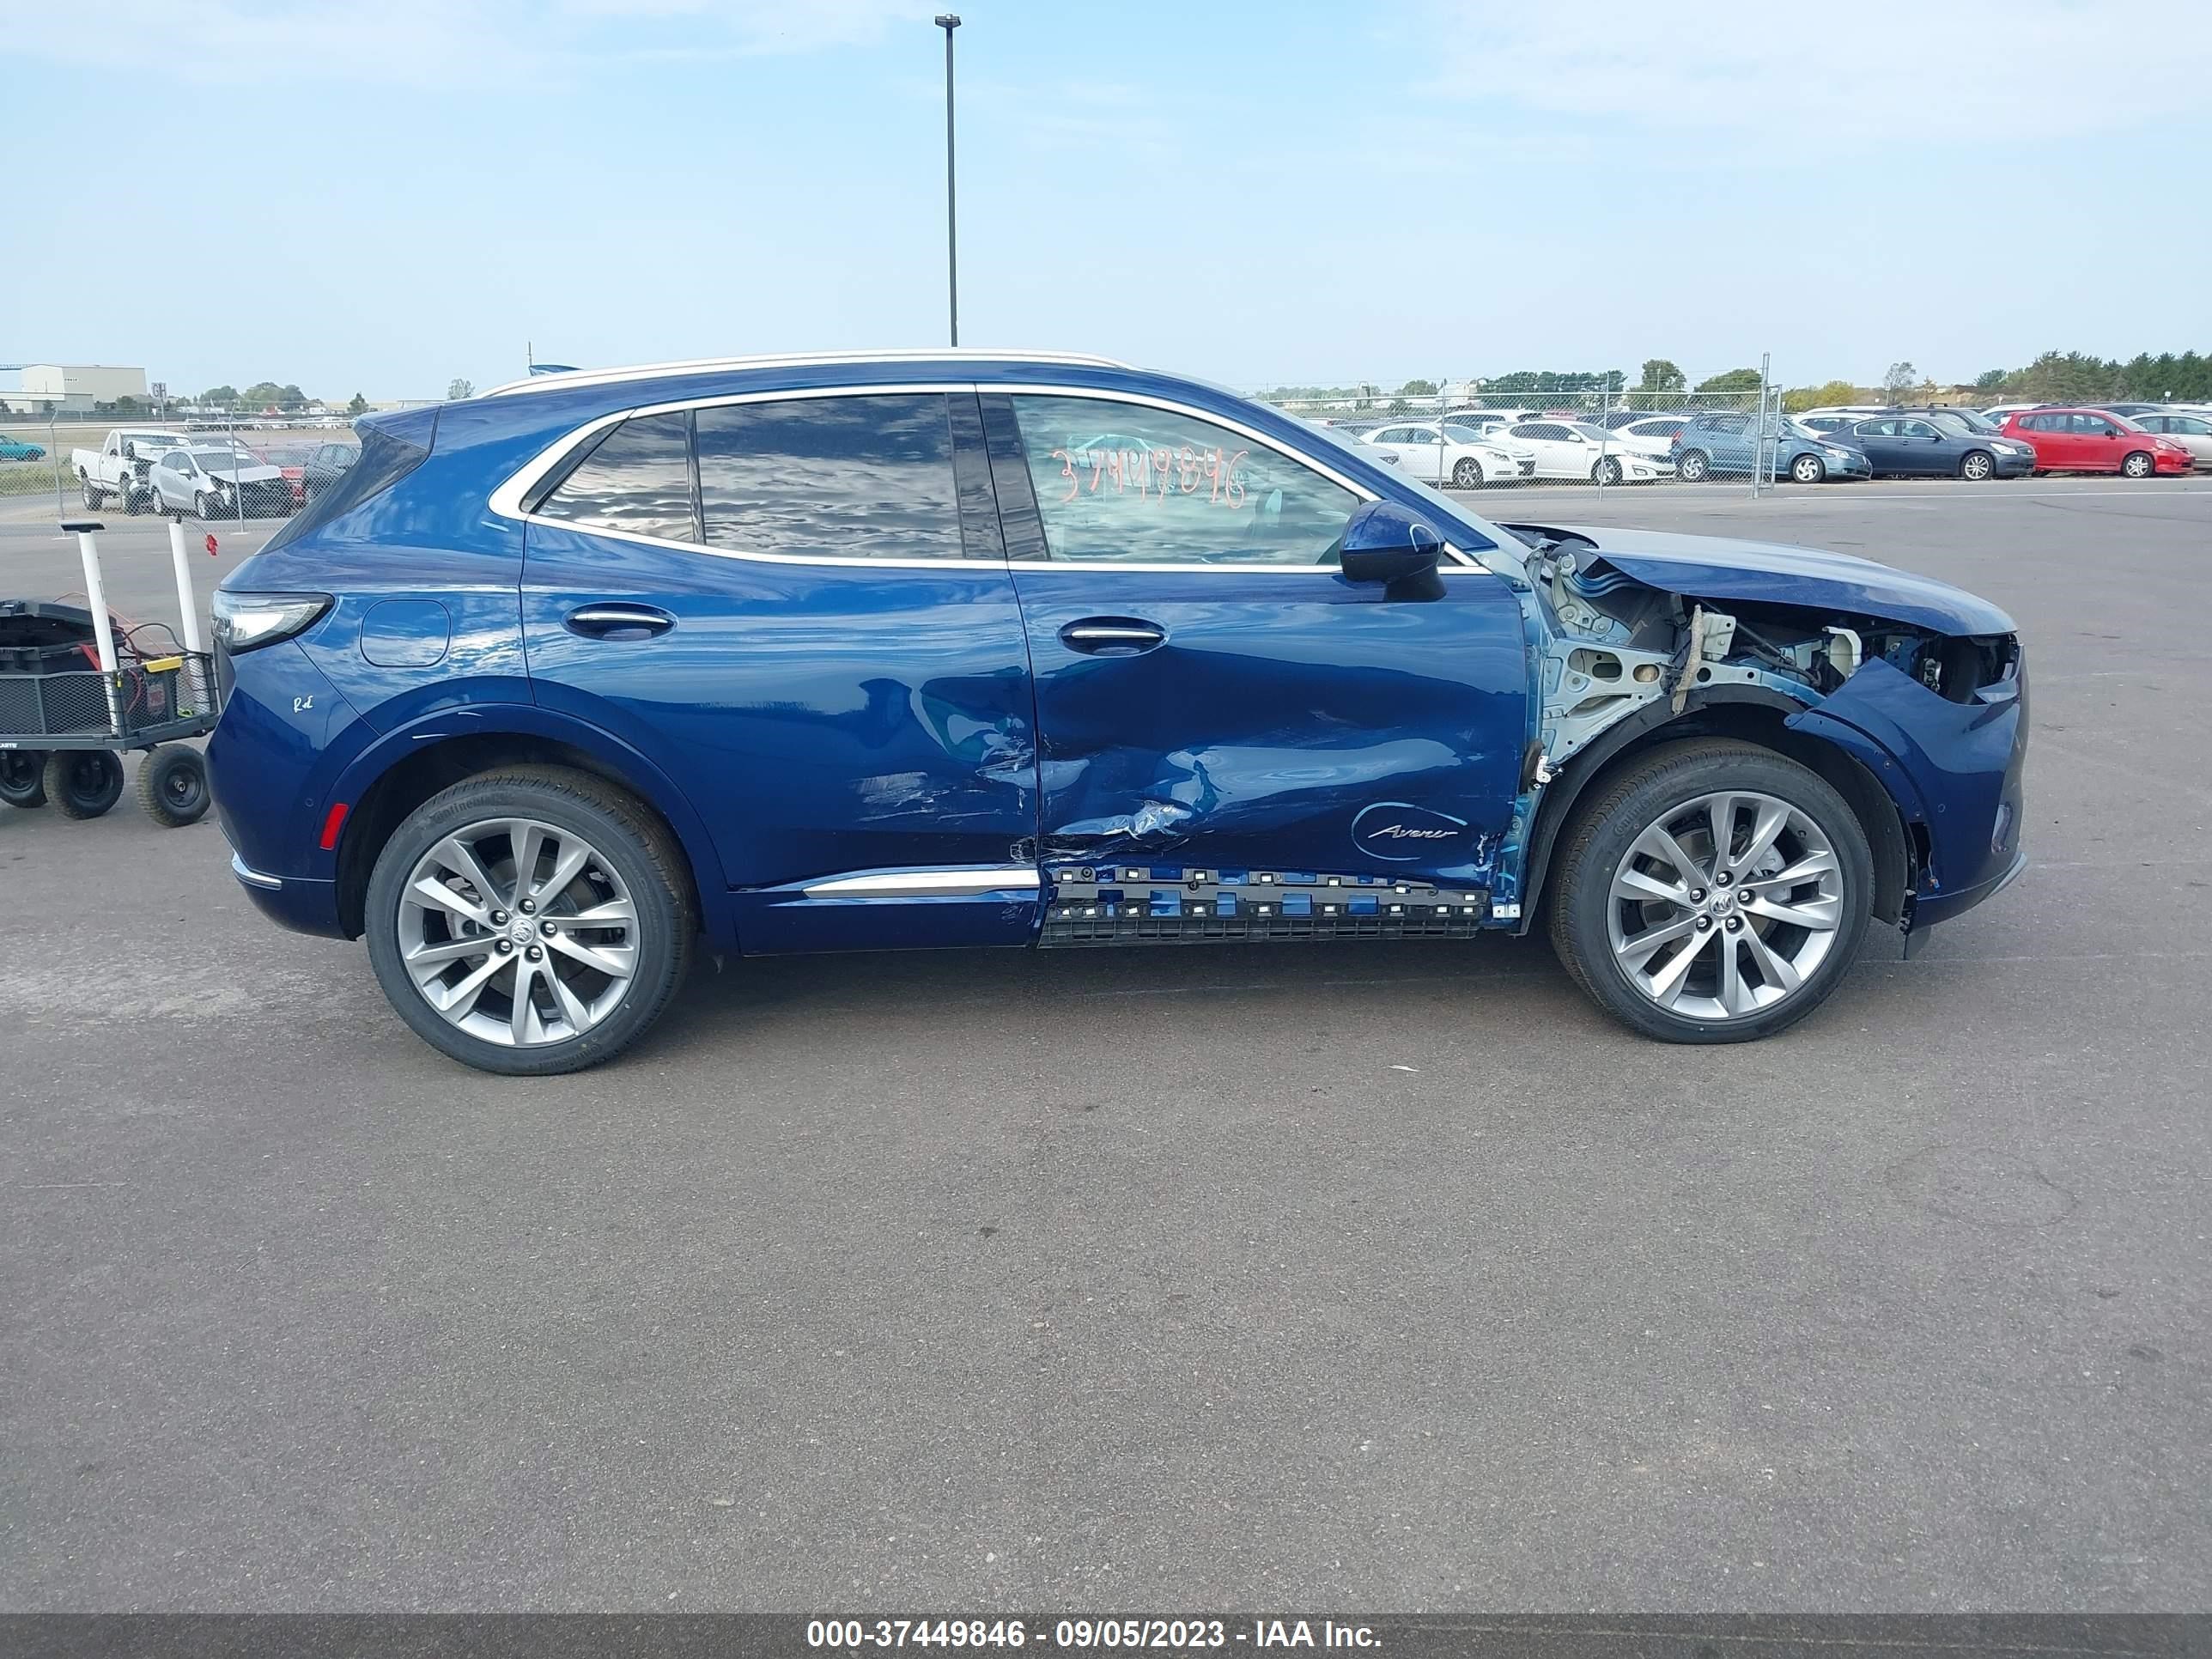 LRBFZSR44PD033506  - BUICK ENVISION  2023 IMG - 13